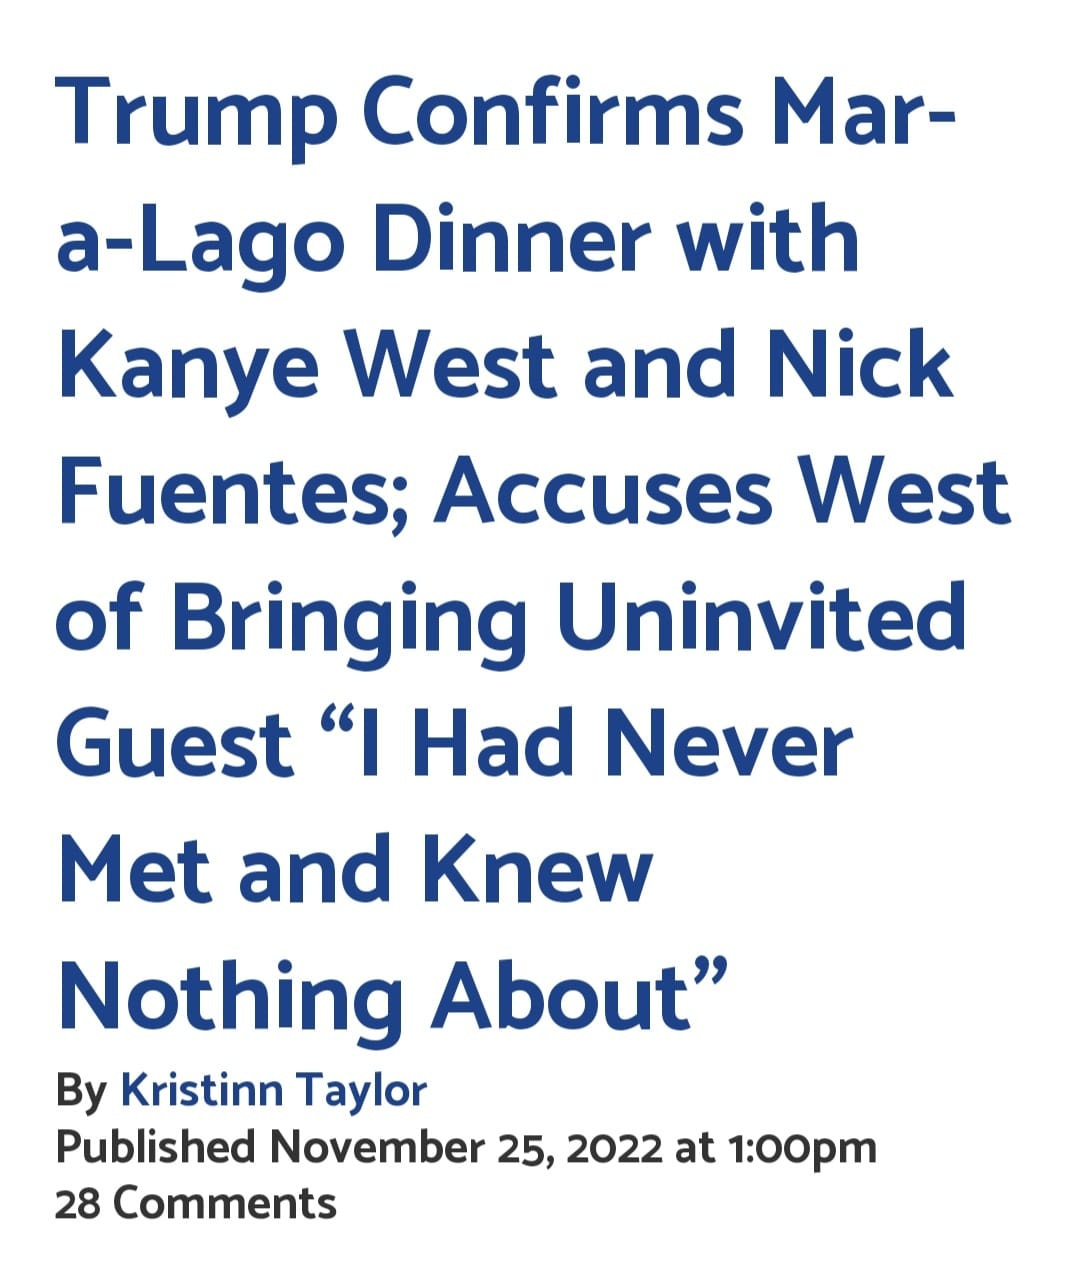 May be an image of text that says 'Trump Confirms Mar- a-Lago Dinner with Kanye West and Nick Fuentes; Accuses West of Bringing Uninvited Guest "I Had Never Met and Knew Nothing About" By Kristinn Taylor Published November 25, 2022 at 1:00pm 28 Comments'